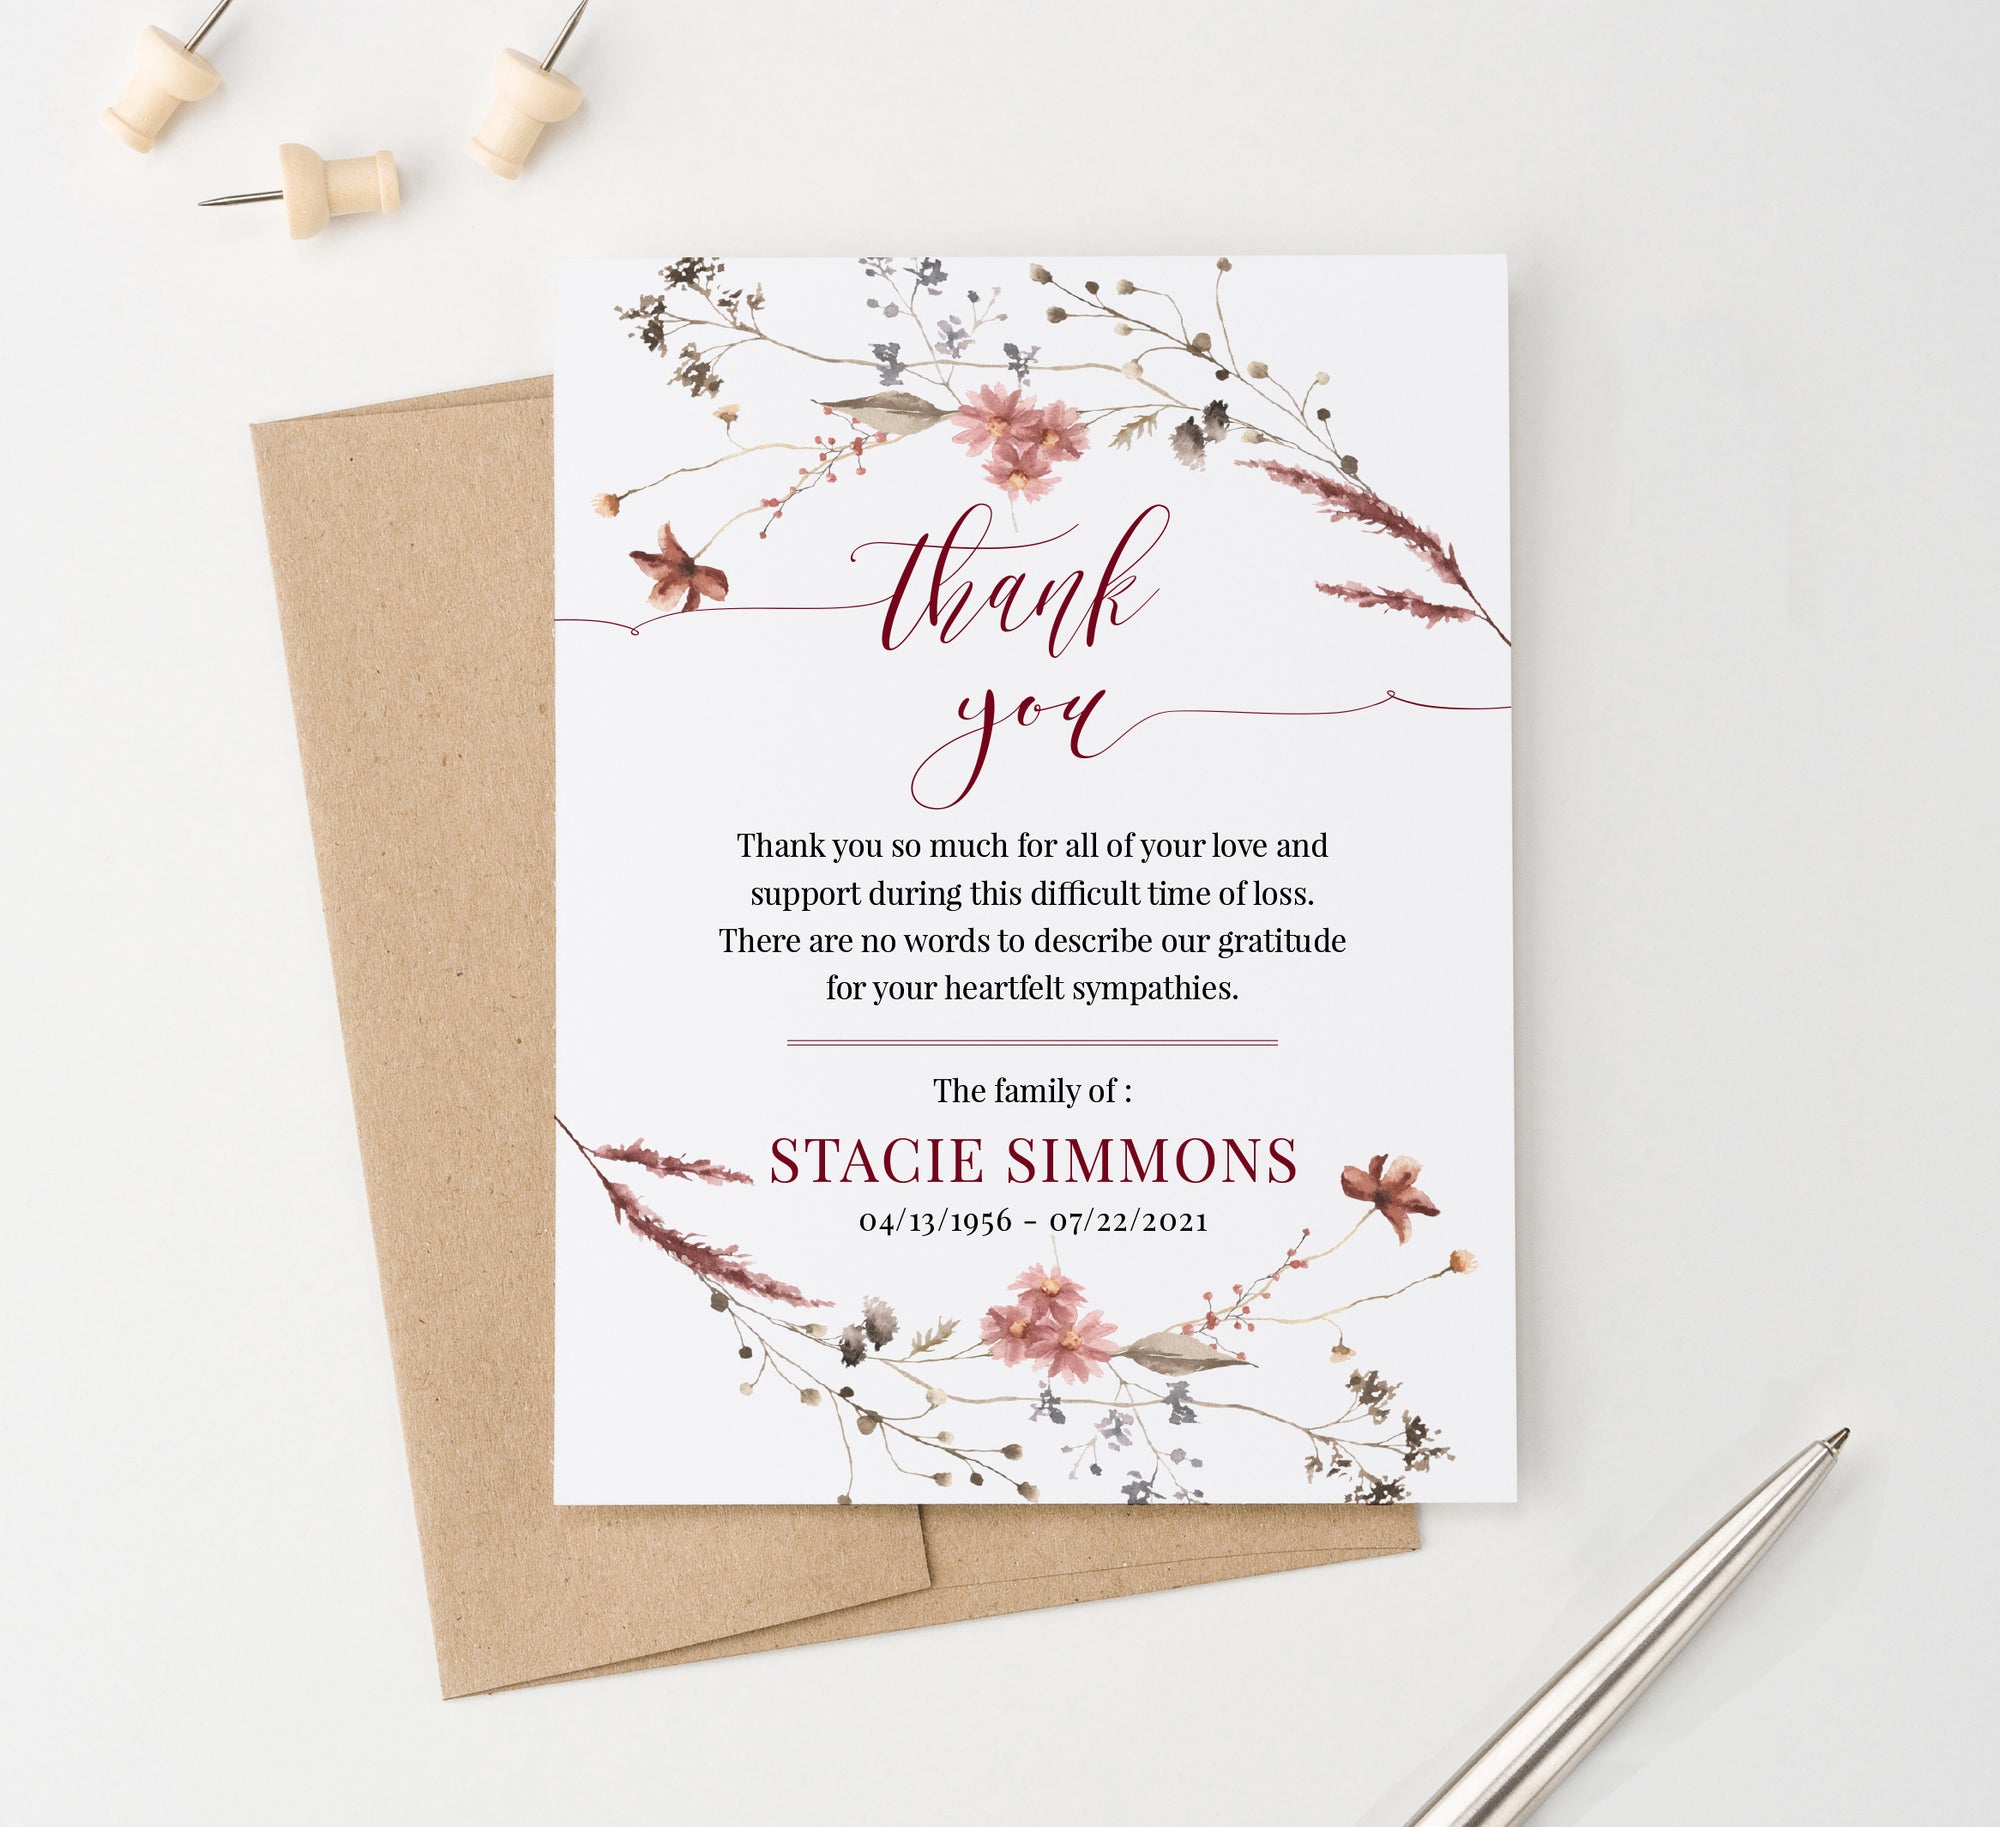 Rustic Personalized Sympathy Thank You Cards With Wildflowers